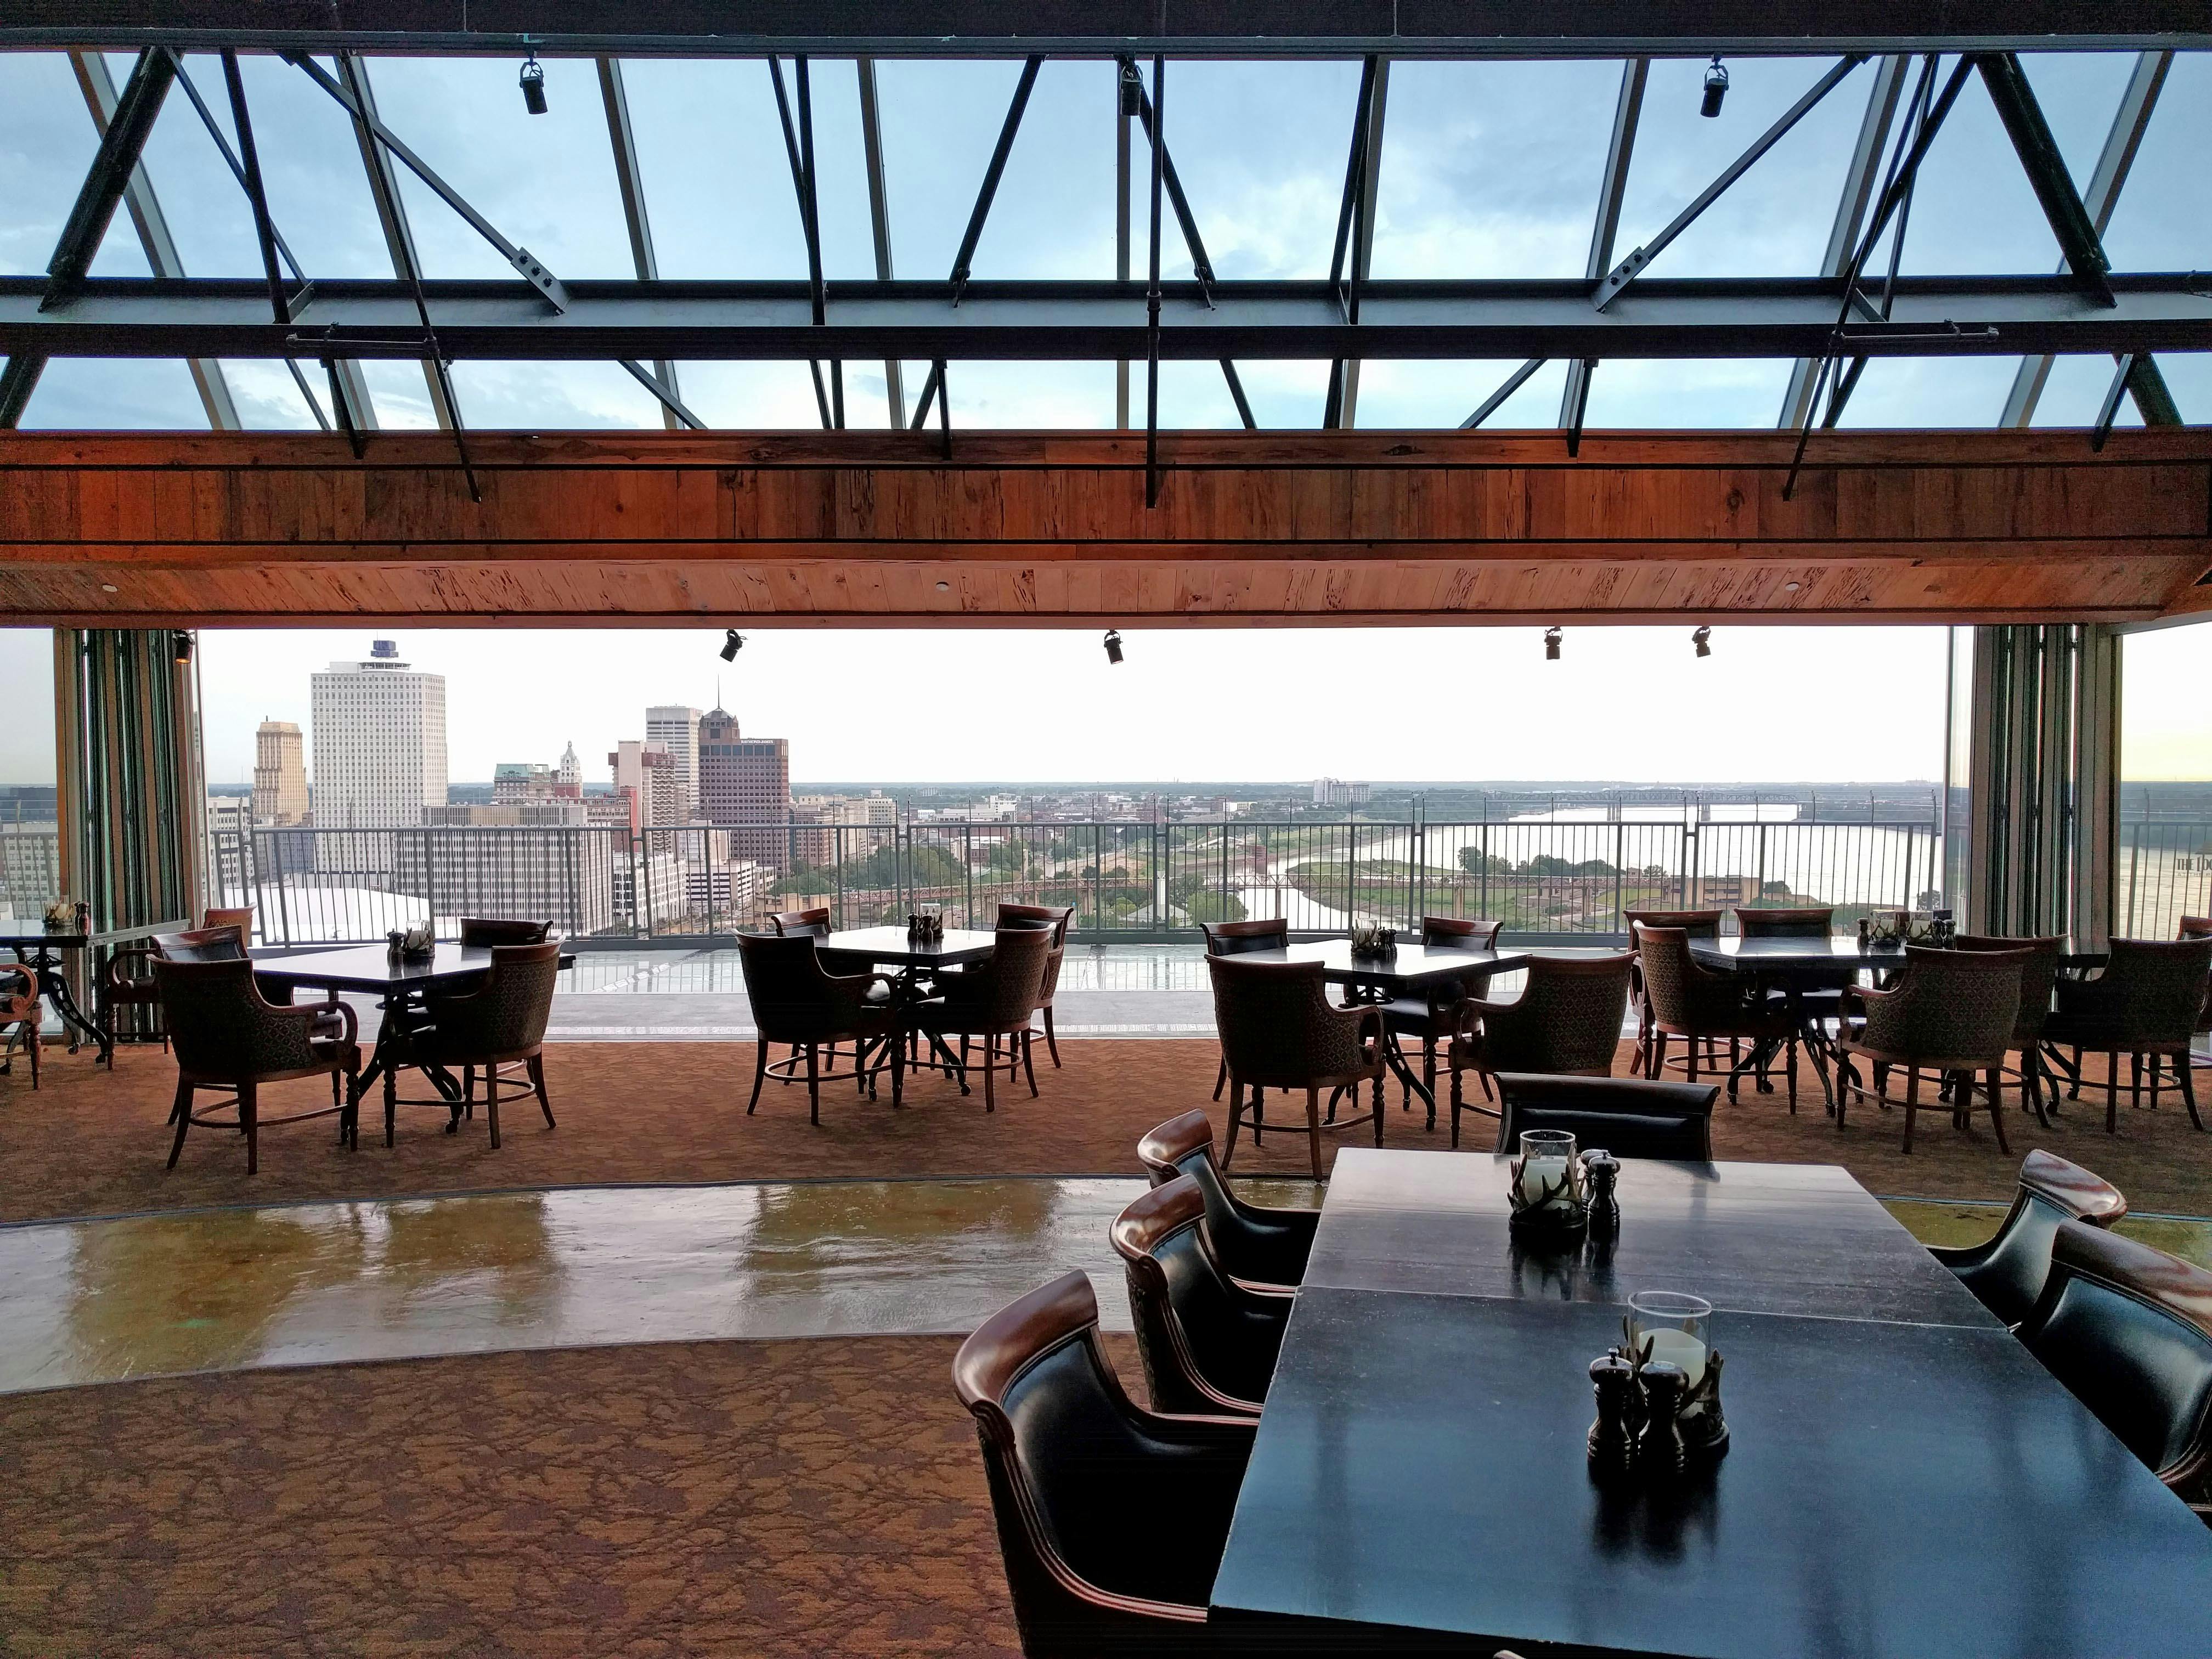 NanaWall SL70 opening glass wall systems at The Lookout Memphis